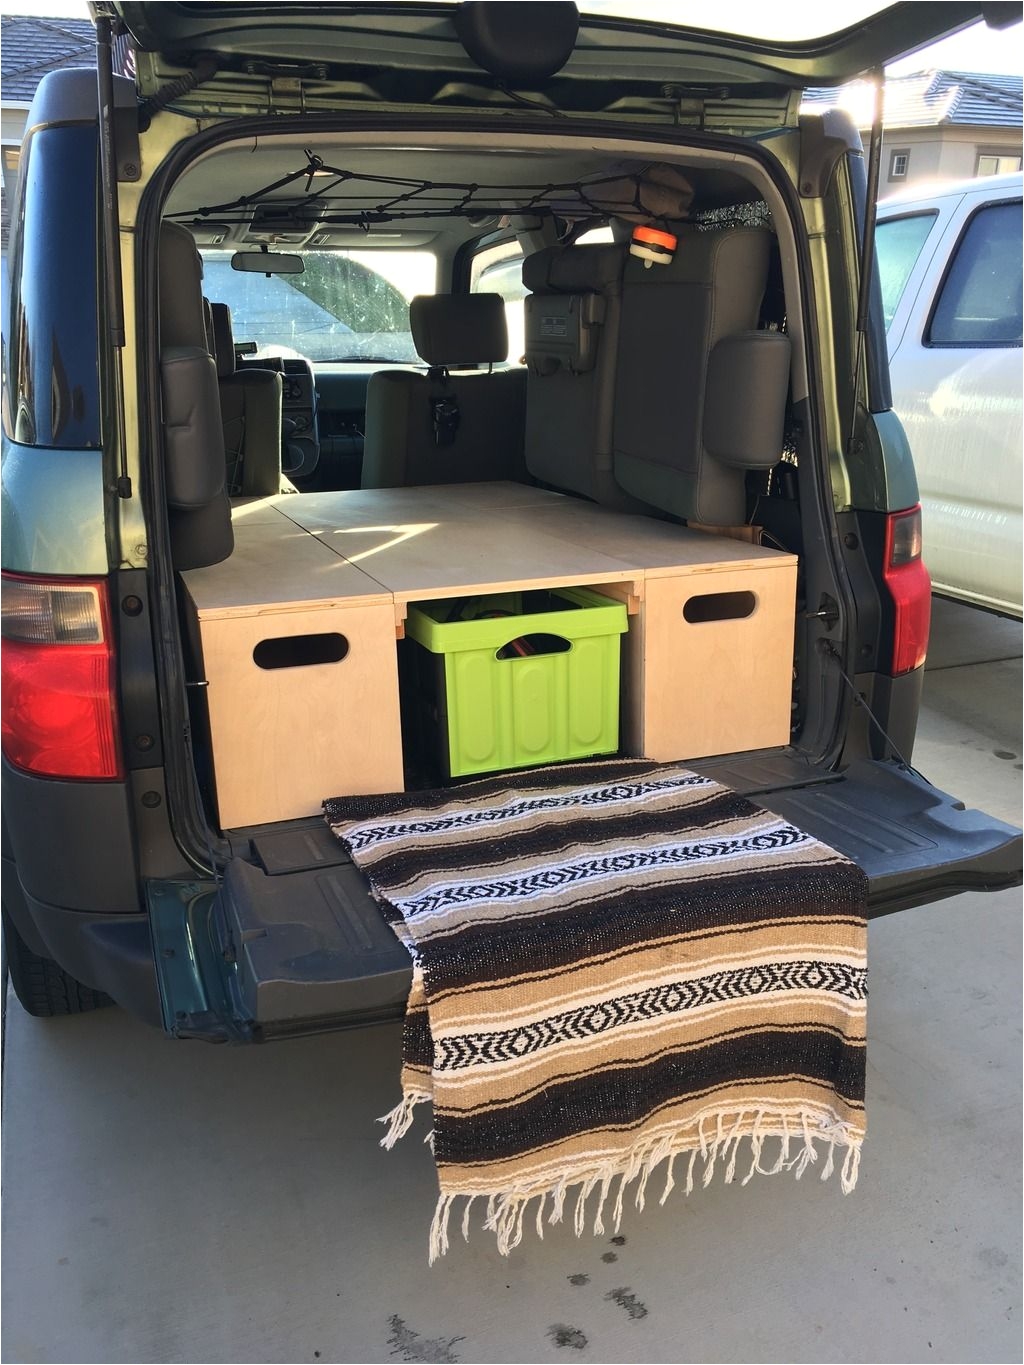 2011 Honda Element All-weather Floor Mats is that Yup Another Sleeping Platform Honda Element Owners